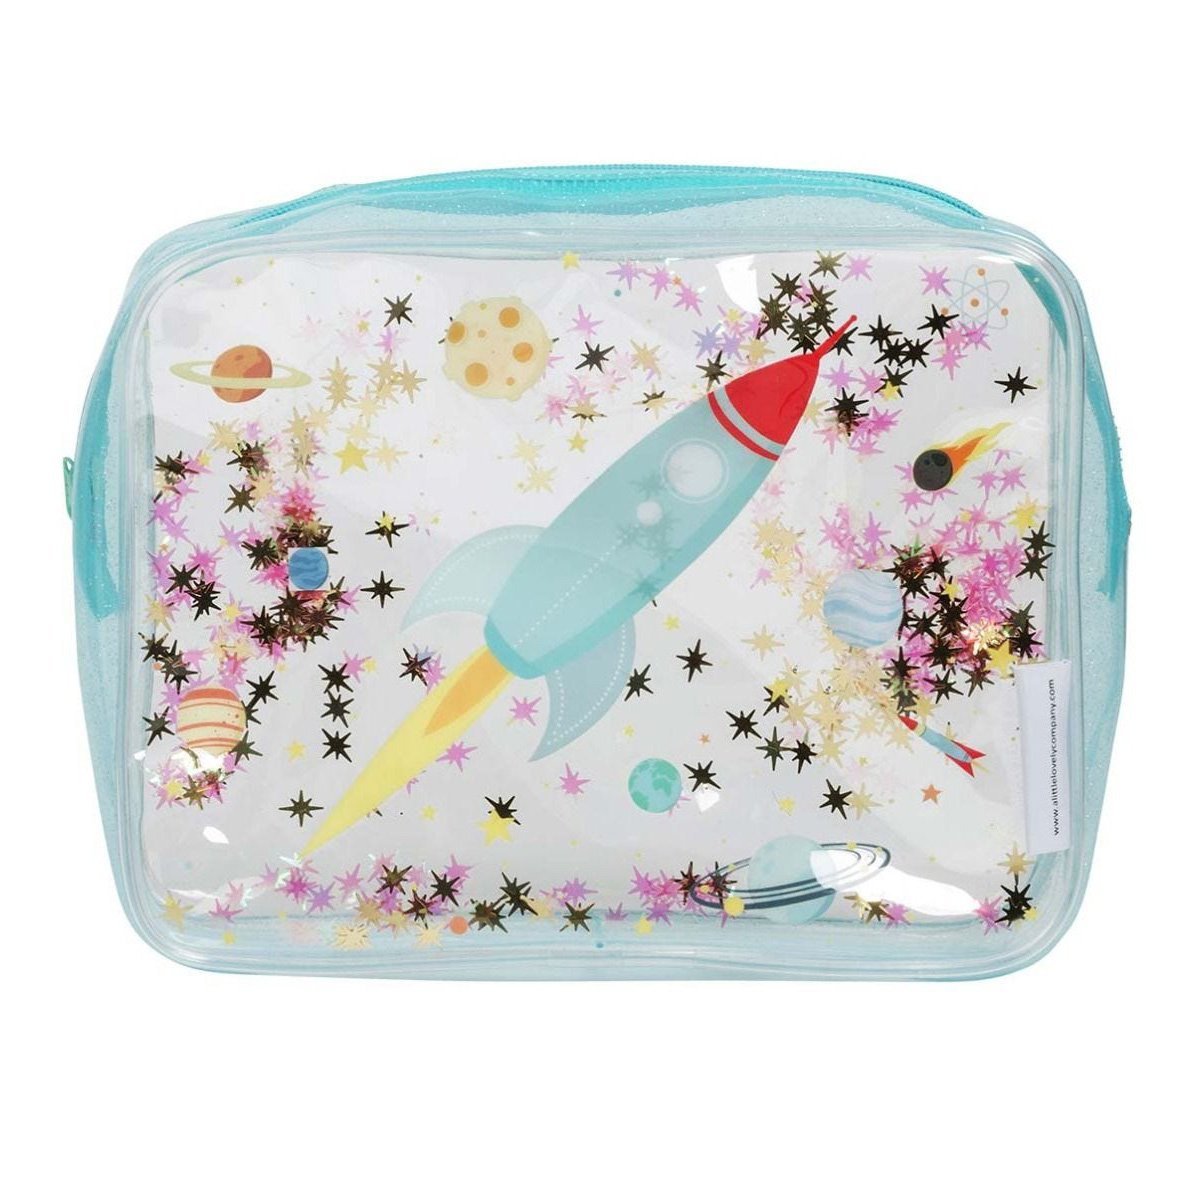 a-little-lovely-company-toiletry-bag-glitter-space- (1)